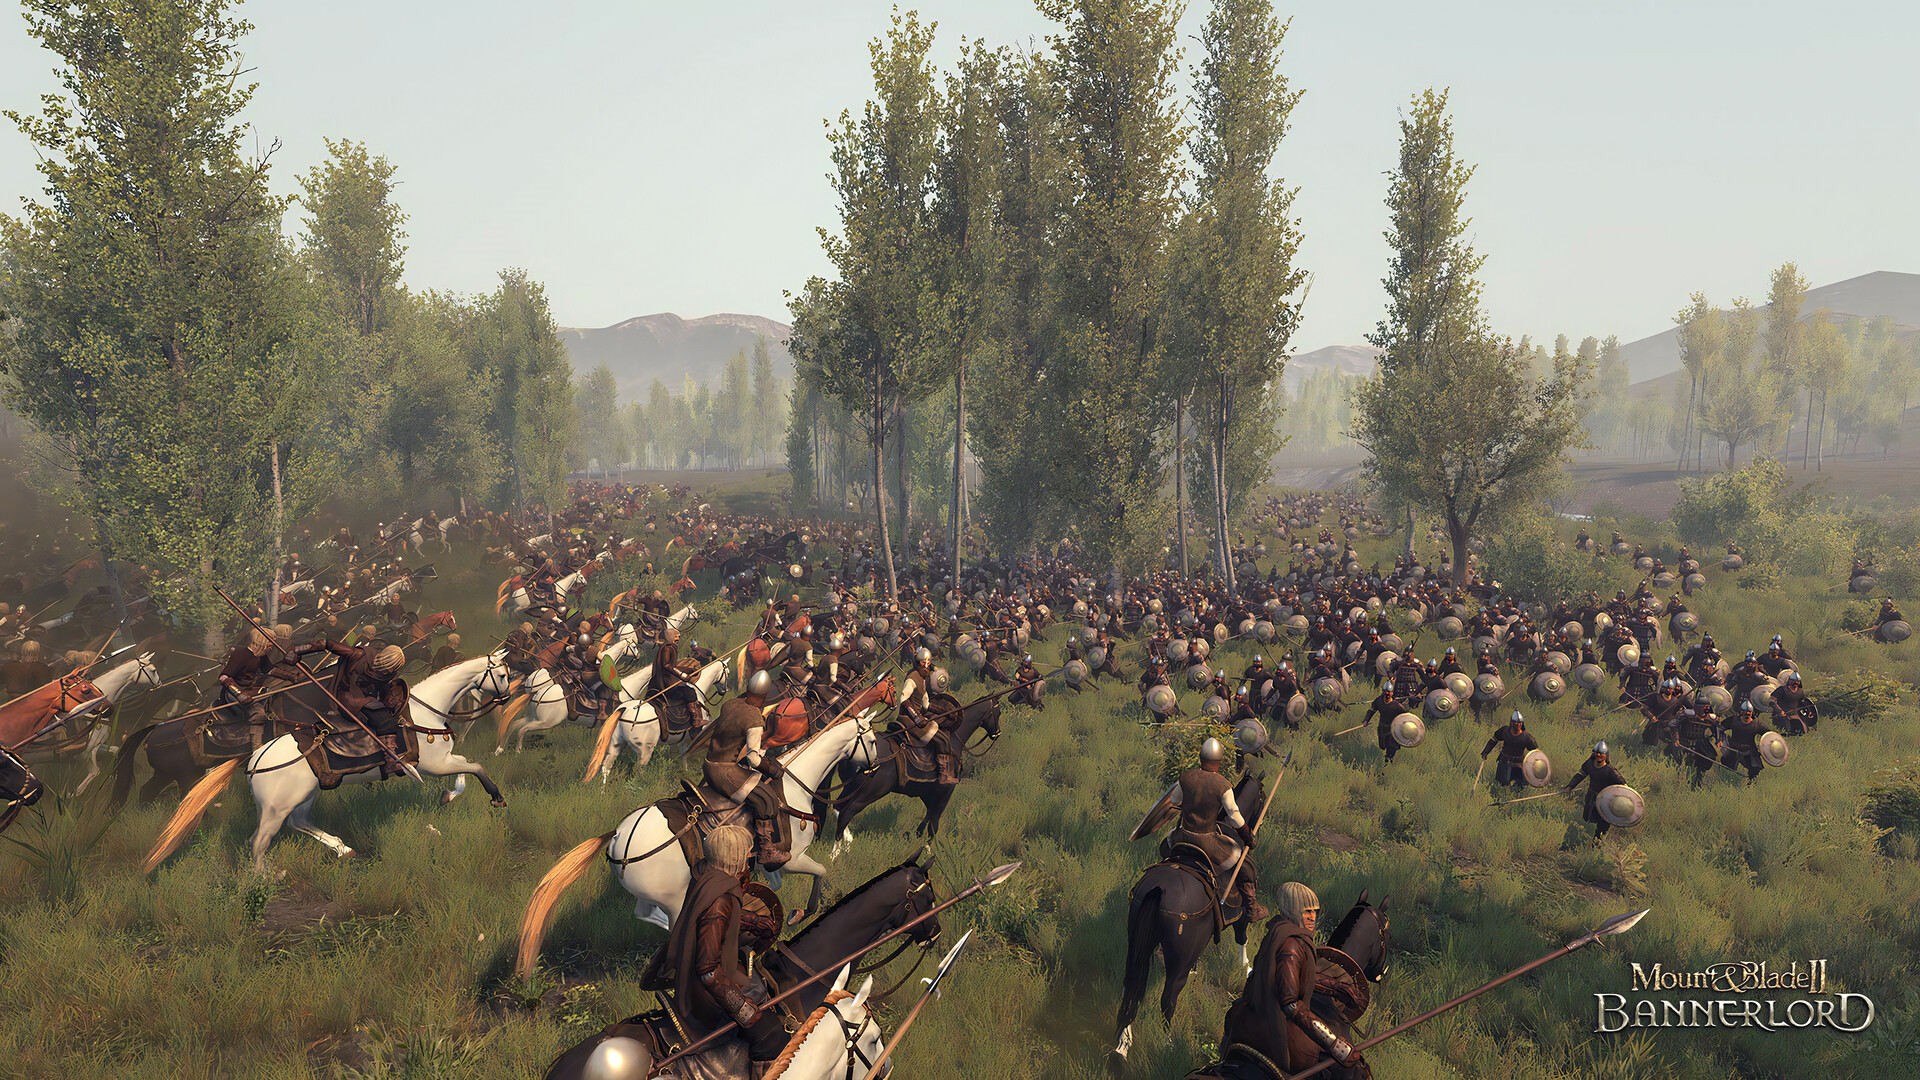 Save 30% on Mount & Blade II: Bannerlord on Steam